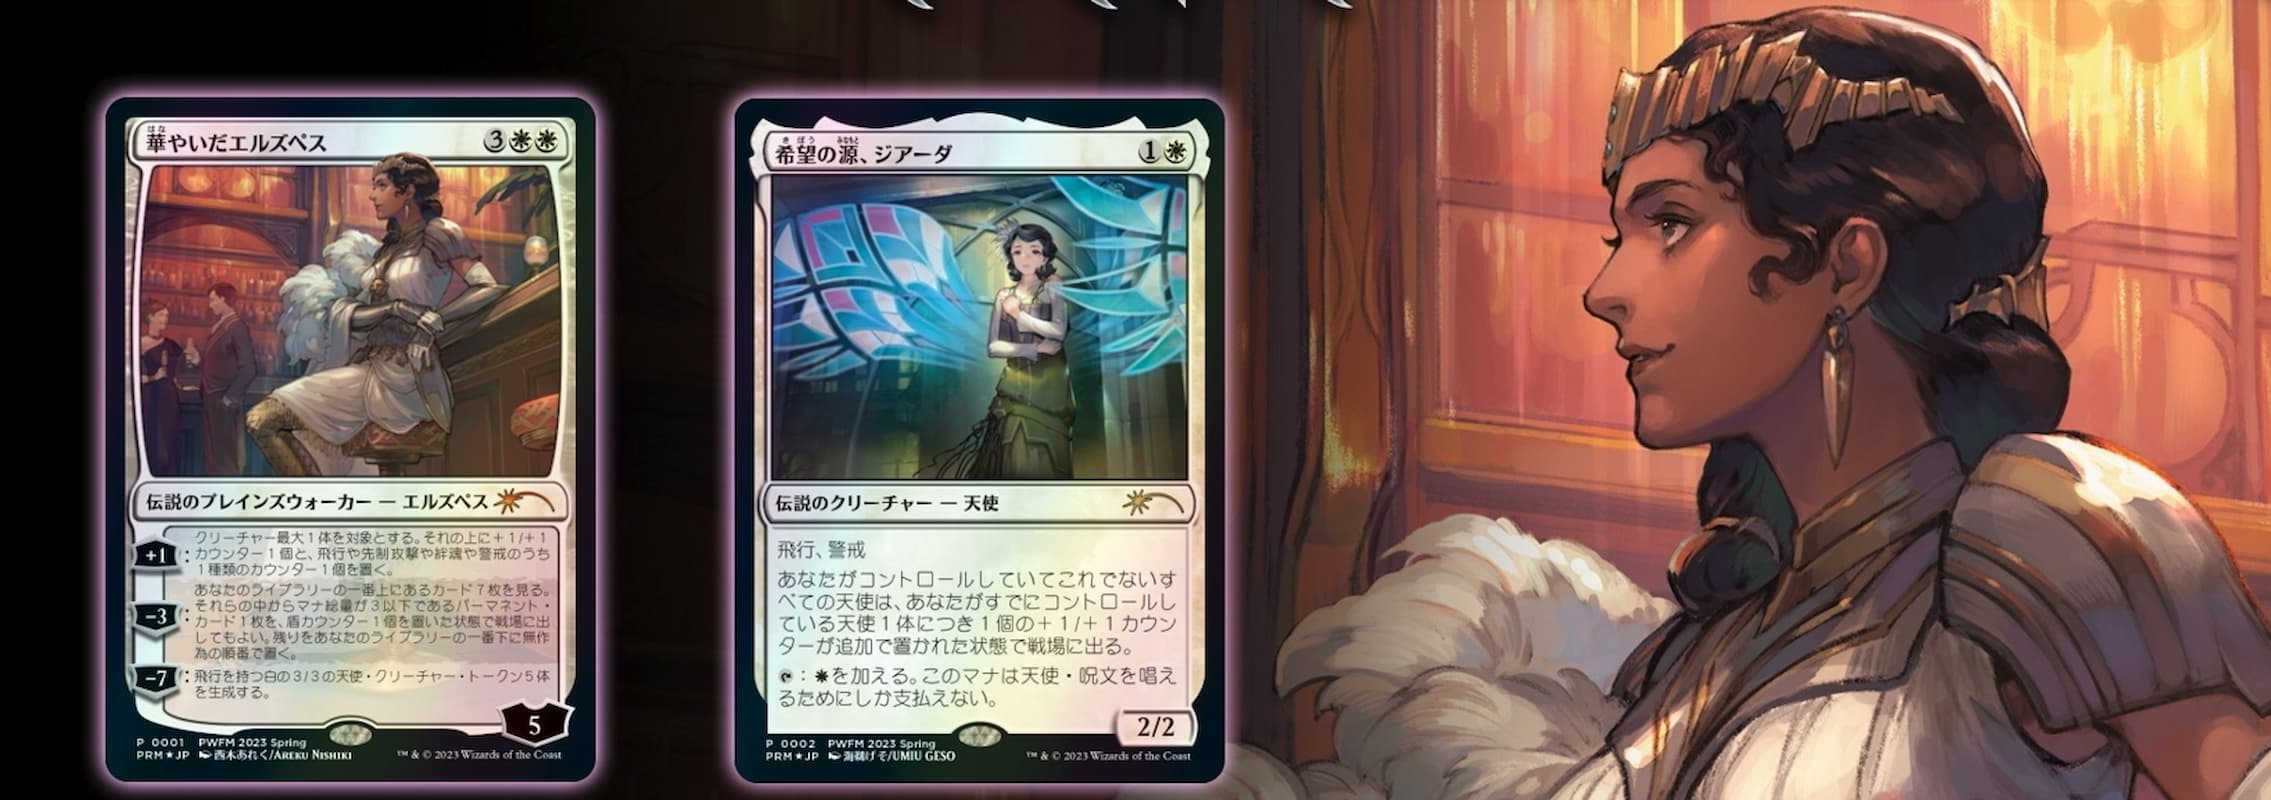 Elspeth and Giada get an anime makeover in Japanese MTG promo 